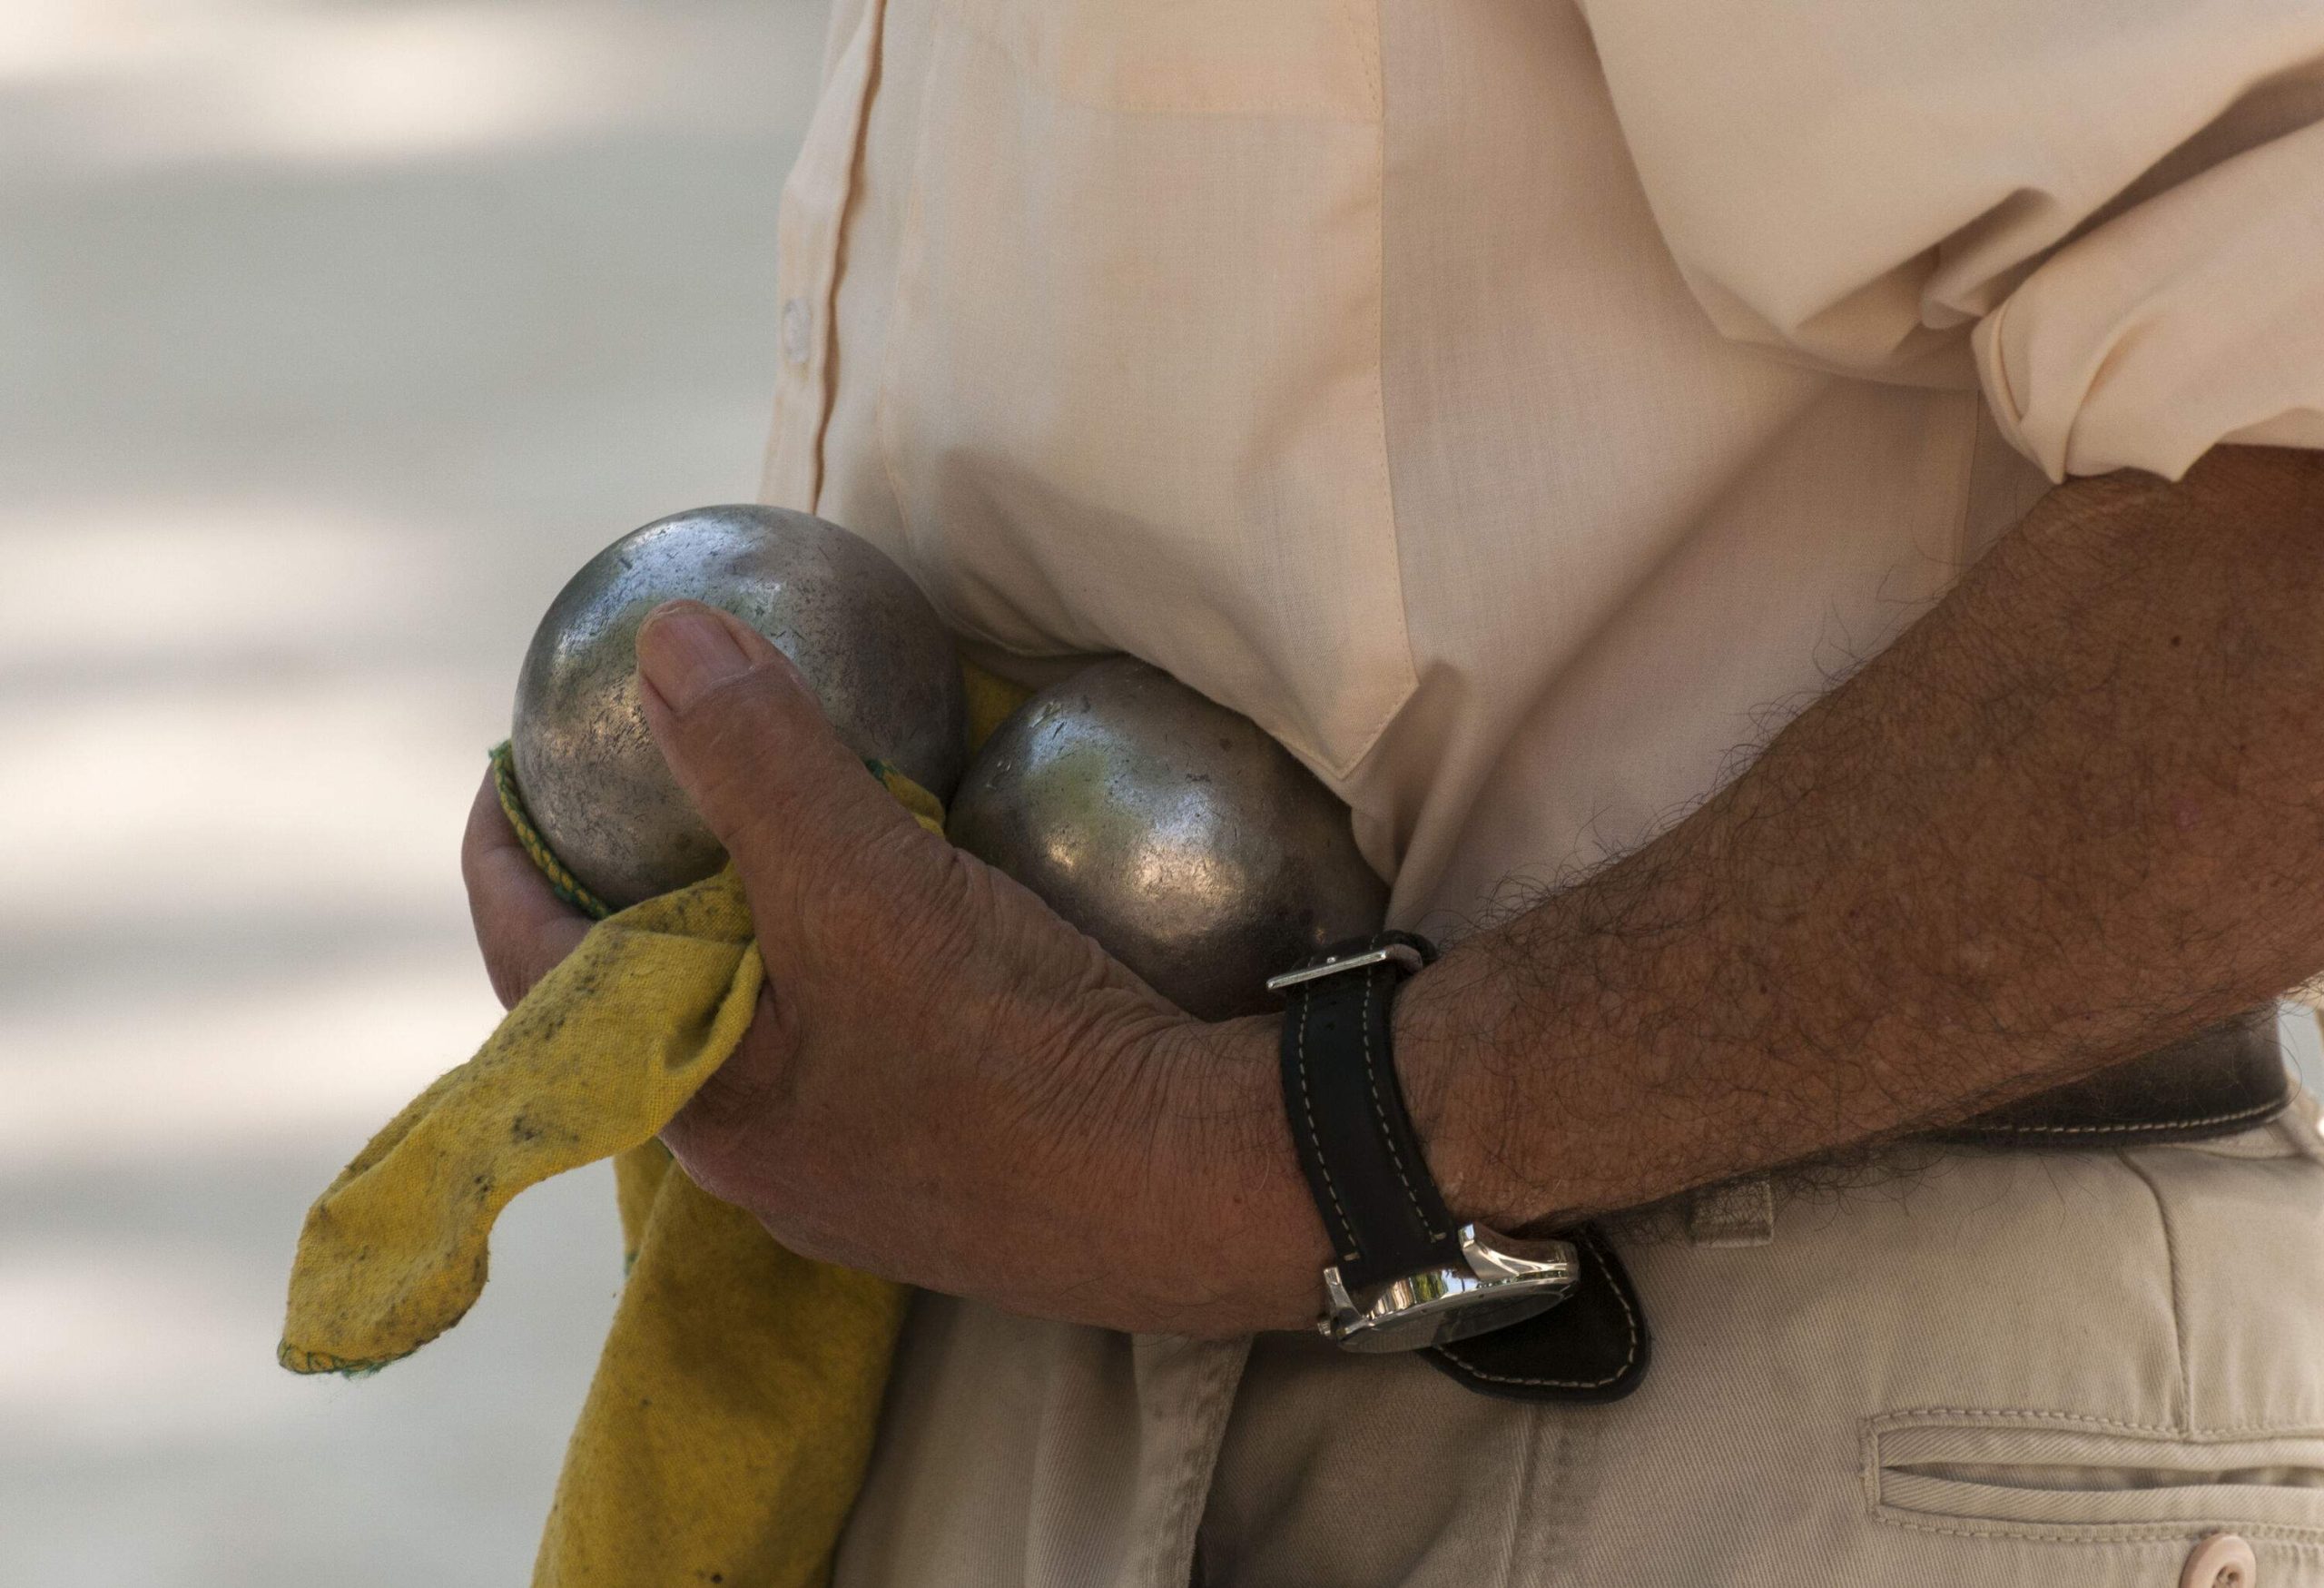 A person holding two boules while wearing a wristwatch.